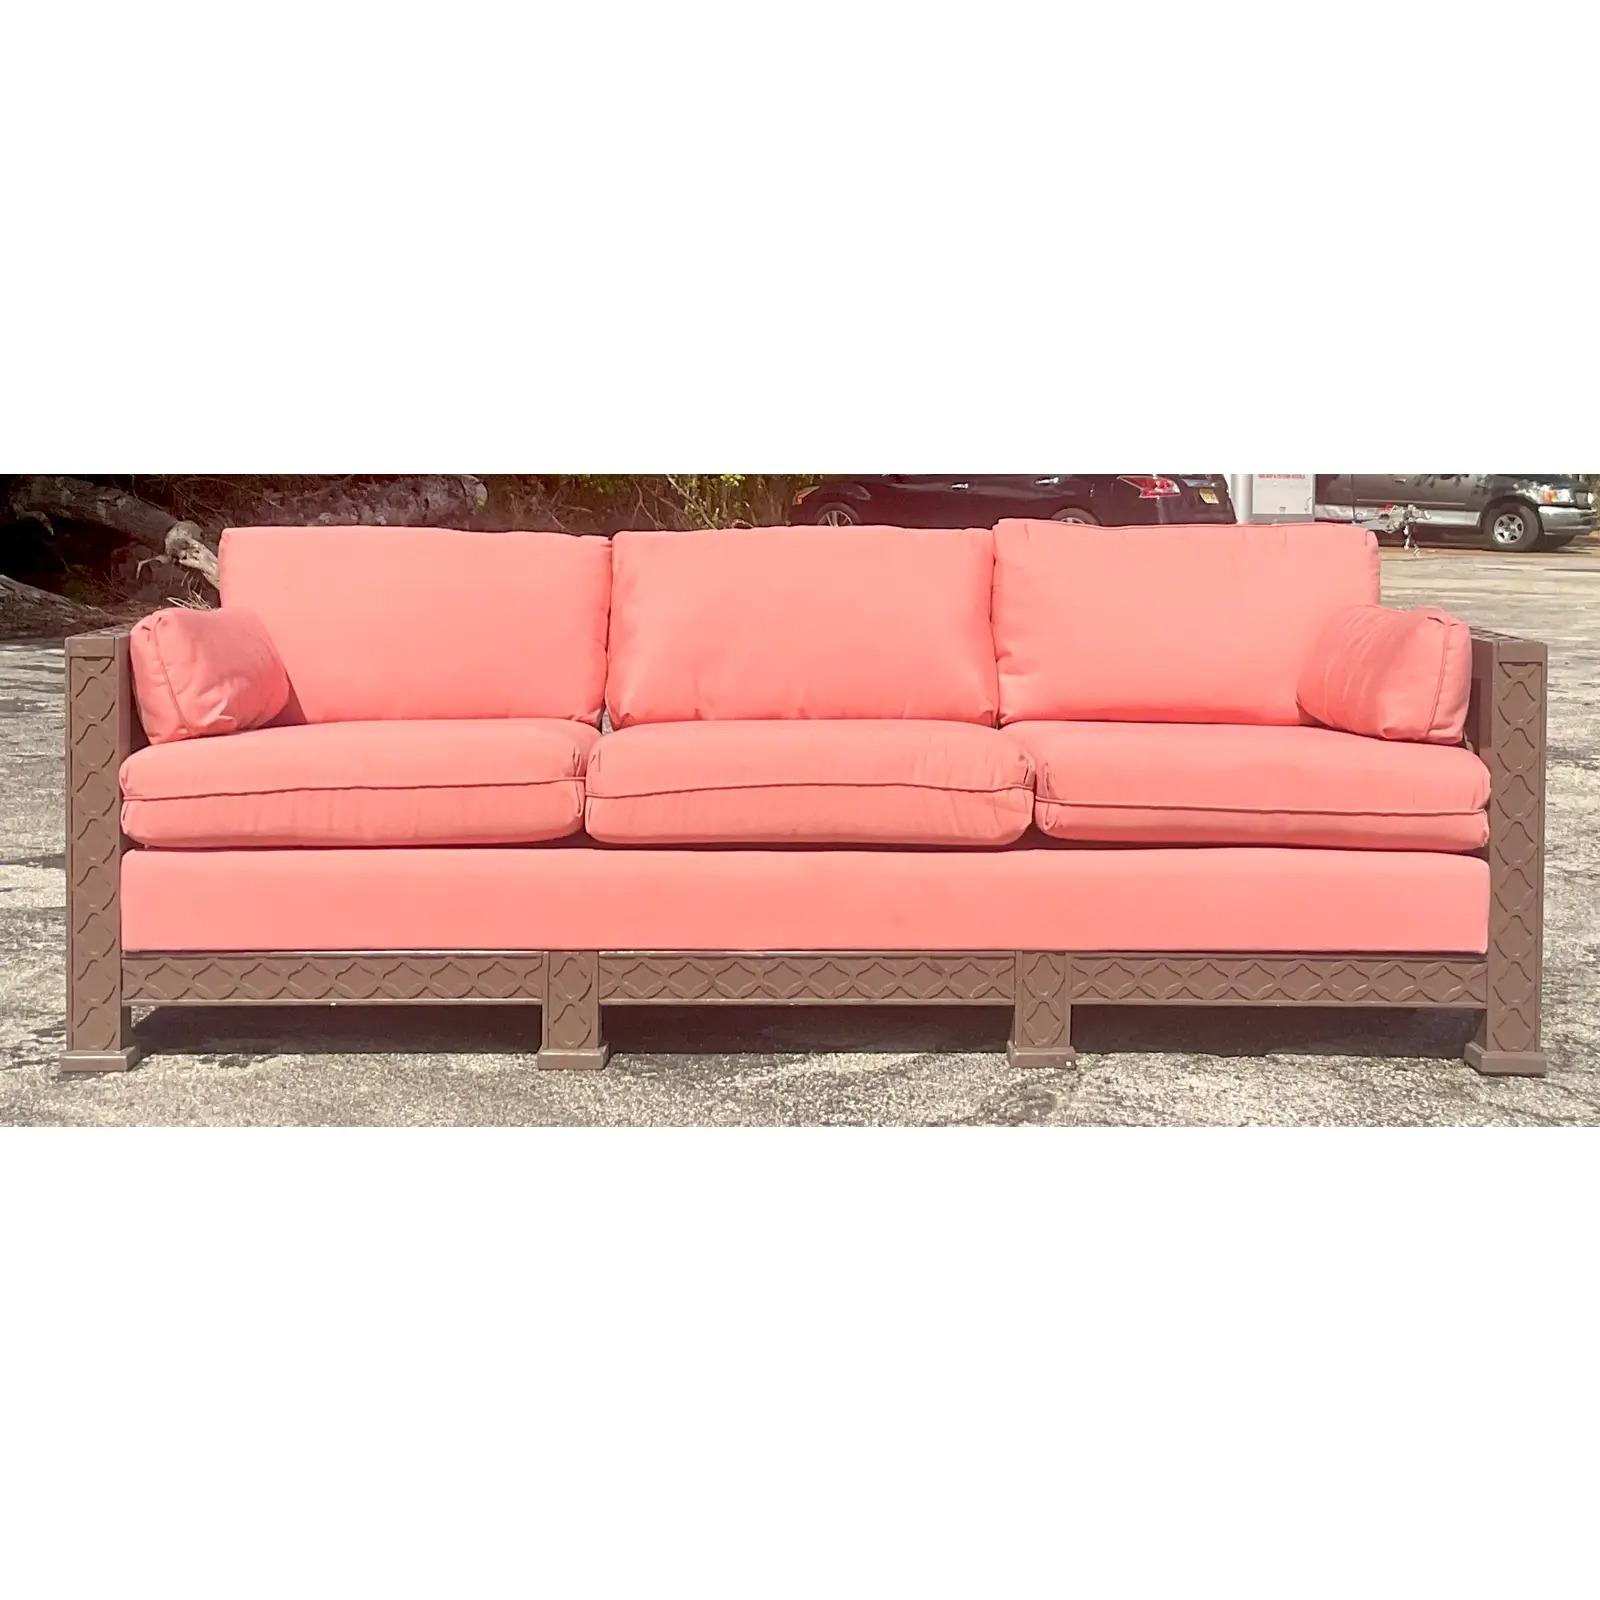 A fantastic vintage Regency wood frame sofa. A chic Chinese Chippendale frame with an upholstered bench seat. Fretwork trim detail along the edge. Matching loveseat also available. Acquired from a Palm Beach estate.

The sofa is in great